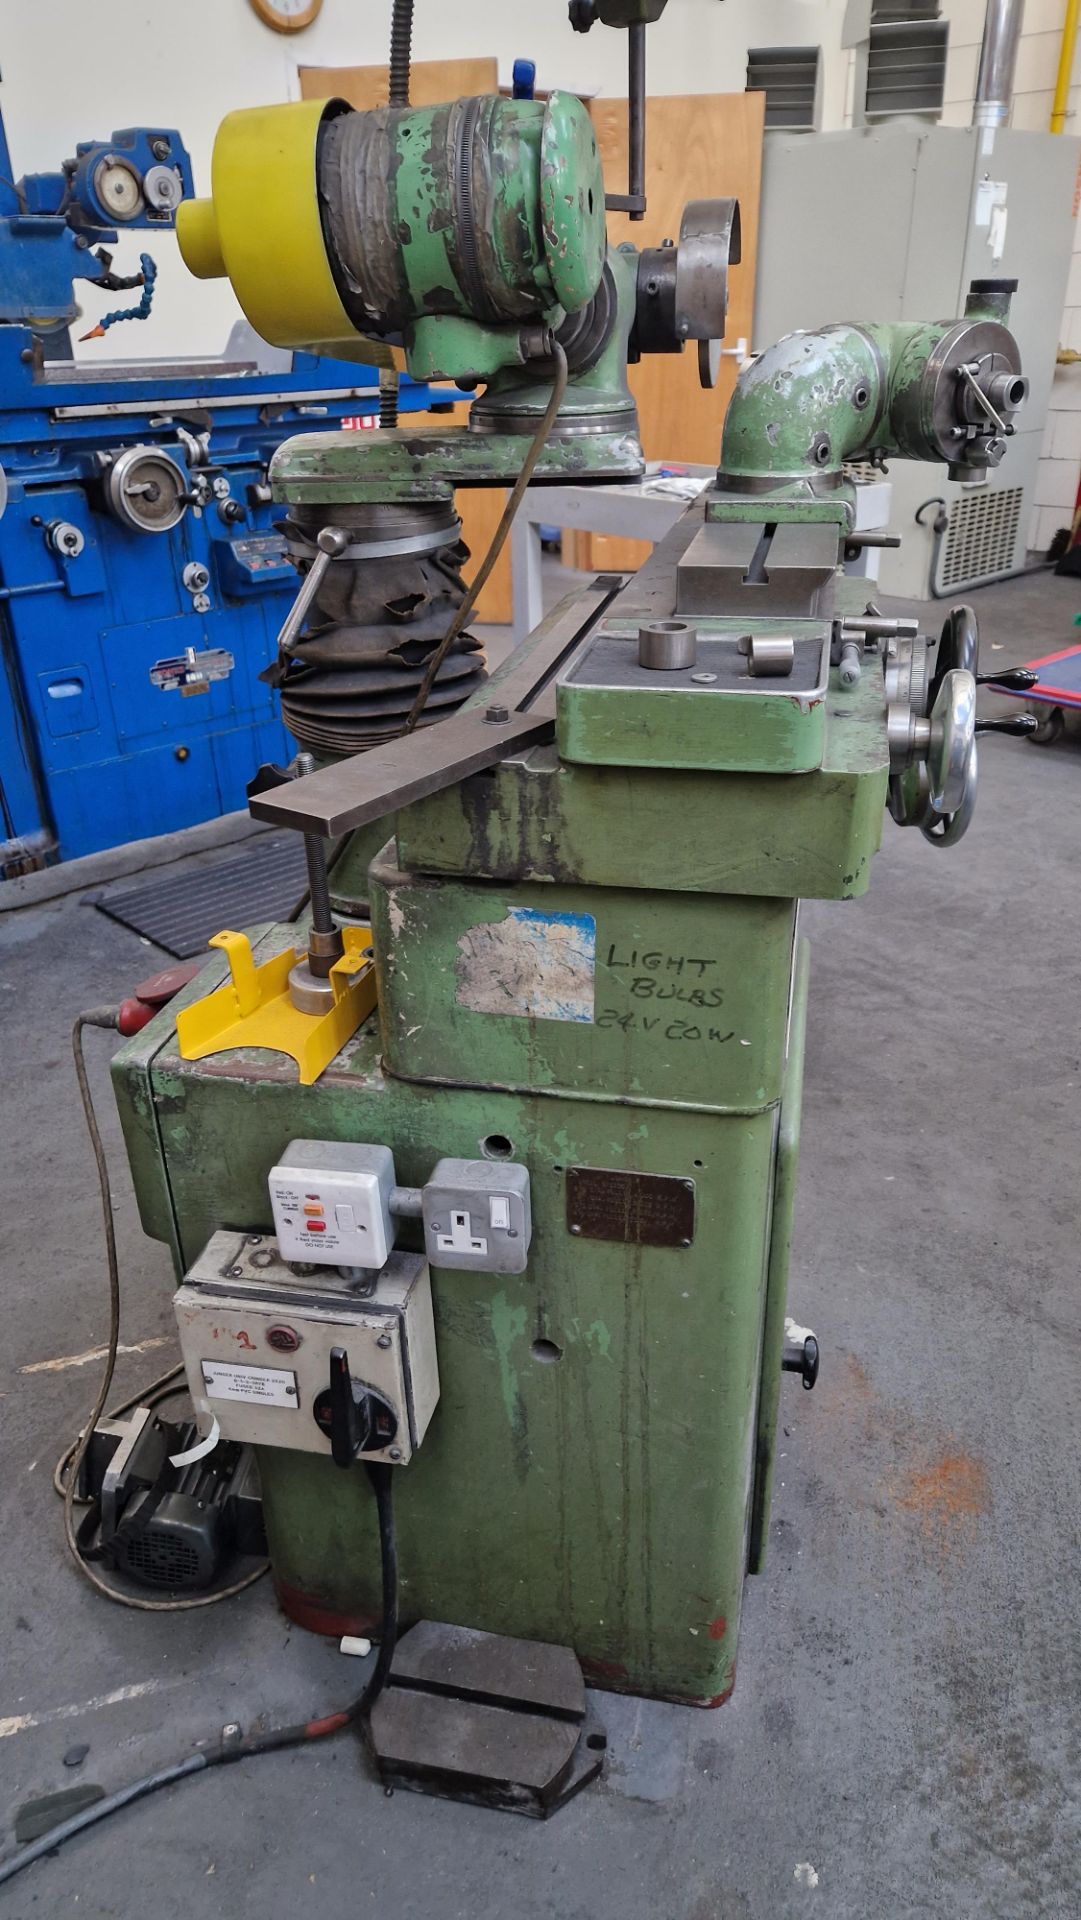 JUNGNER INSTRUMENTS HORIZONTAL GRINDER WITH ASSOCIATED SPARES IN USAG 519 TOOL CHEST - Image 2 of 4